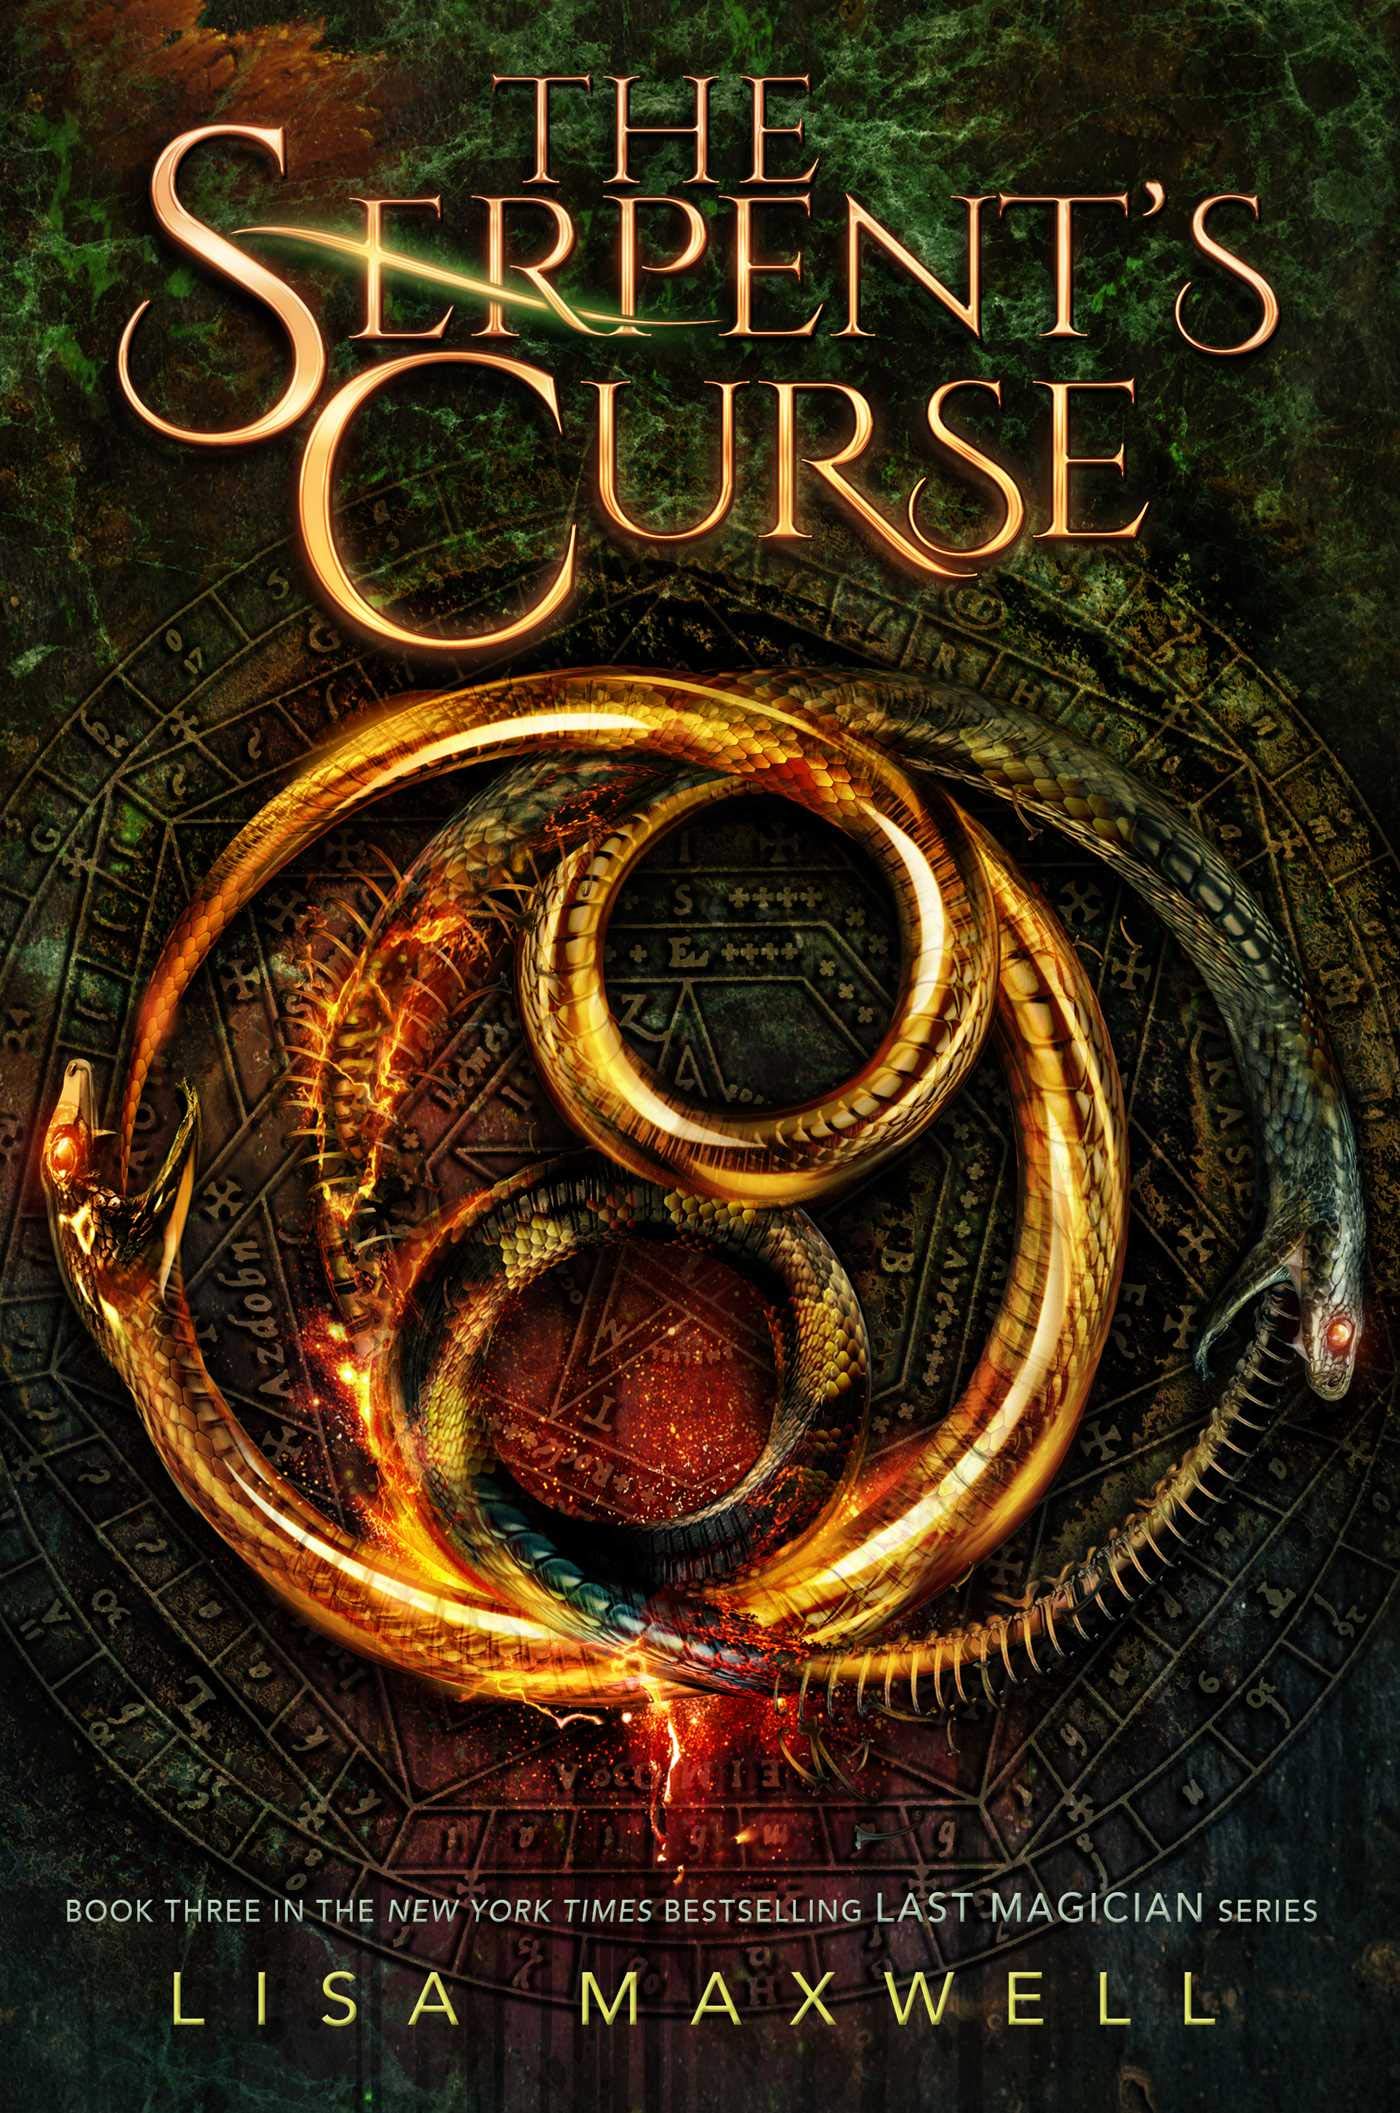 image for "the serpent's curse"